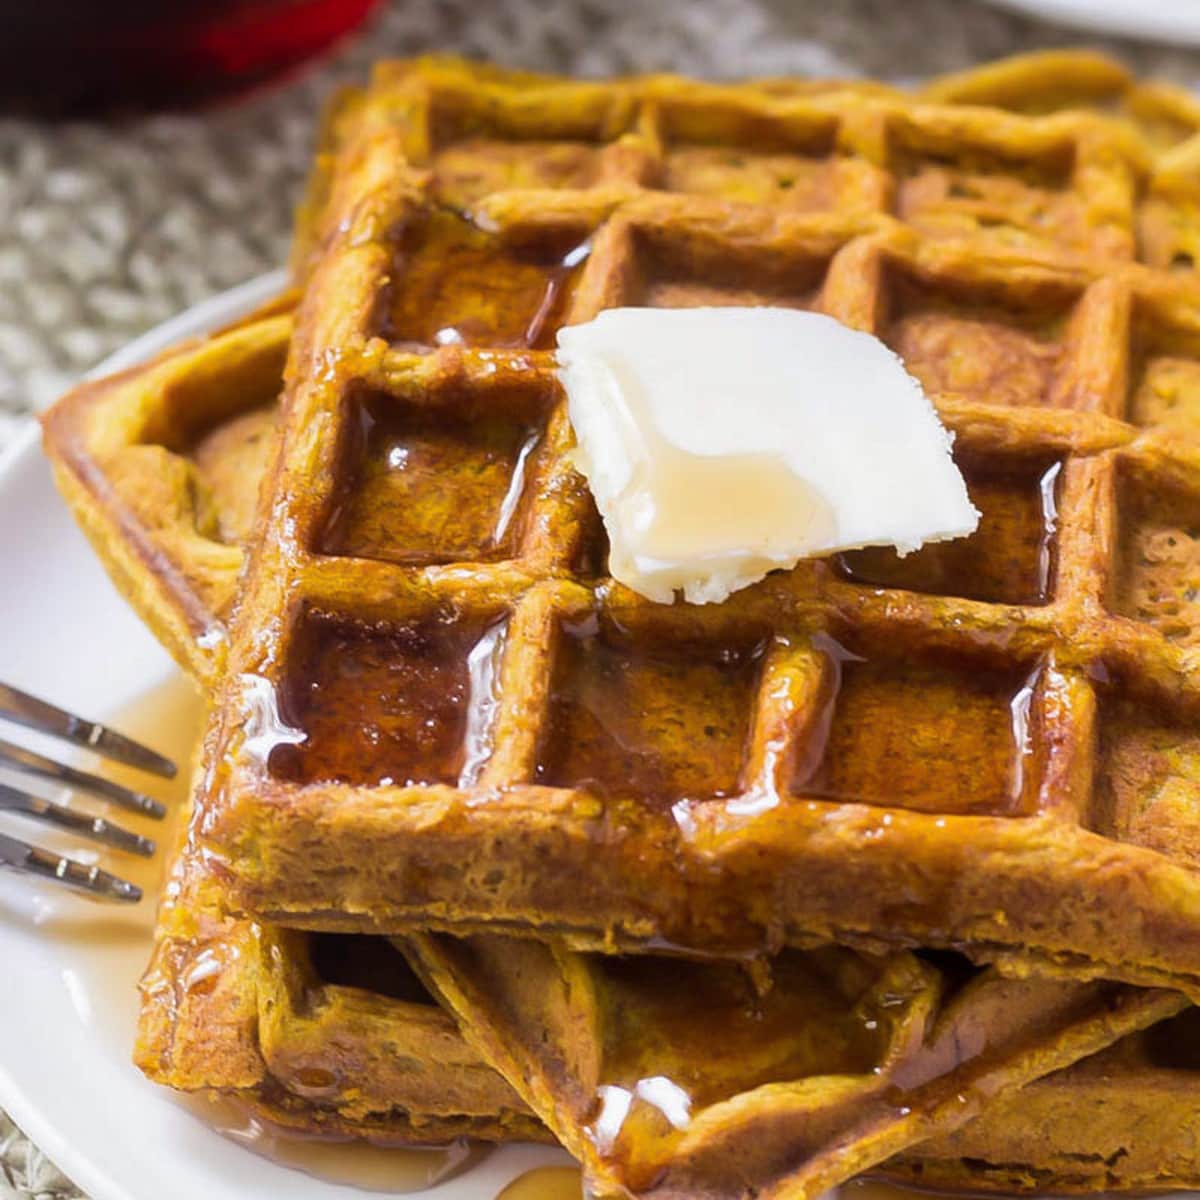 Breakfast for dinner - pumpkin waffles topped with syrup.